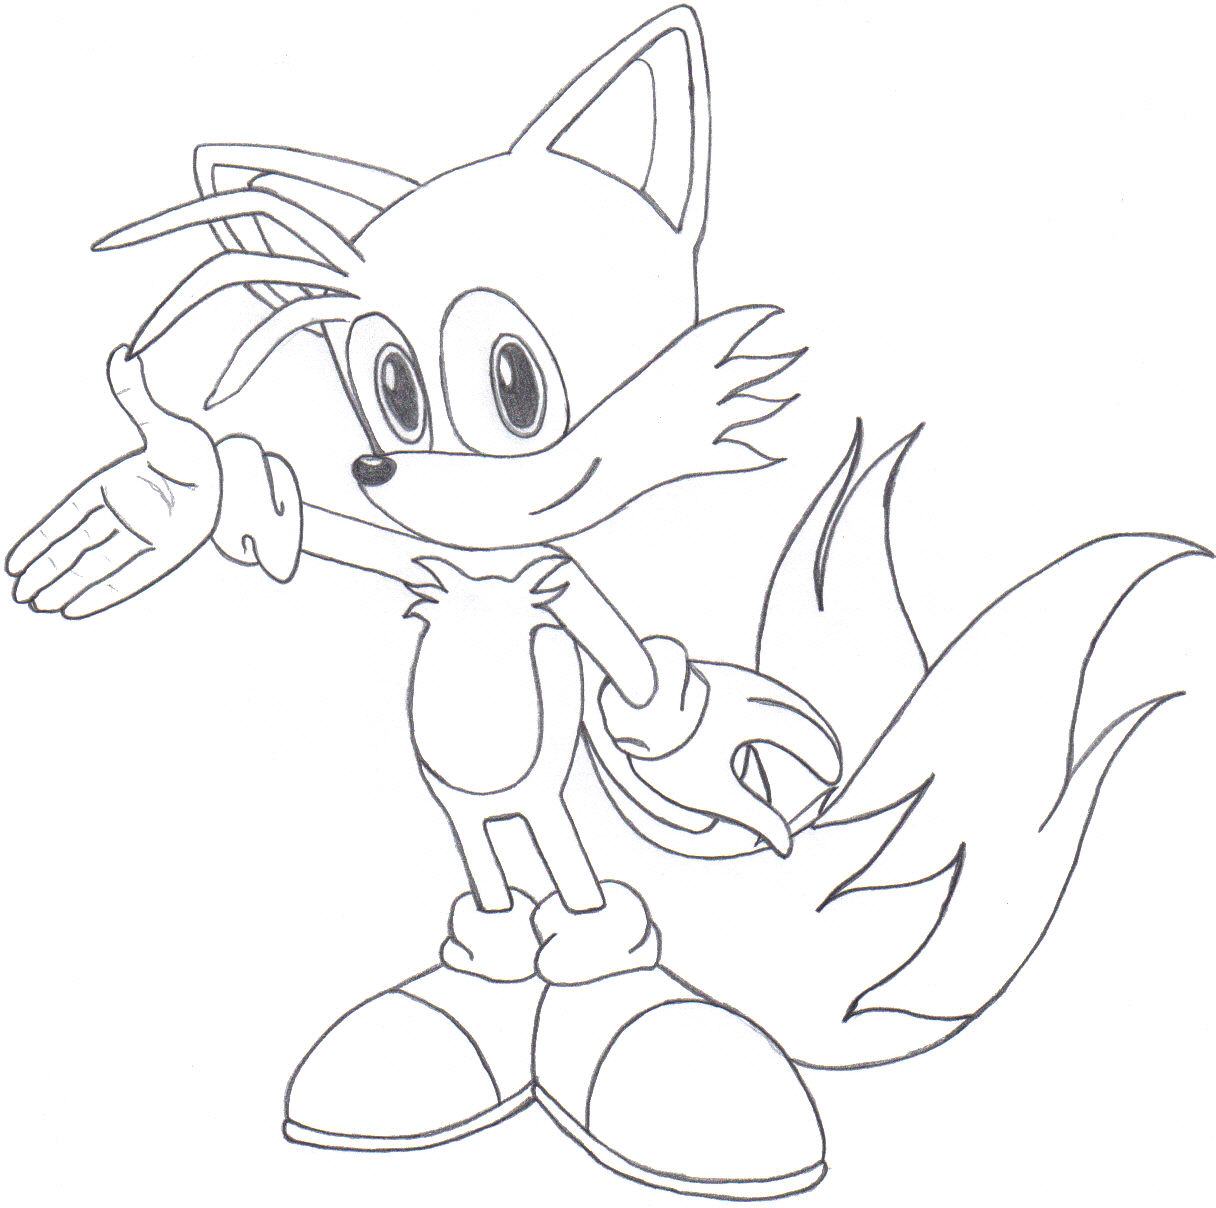 Tails (unshaded) by QuanticChaos1000